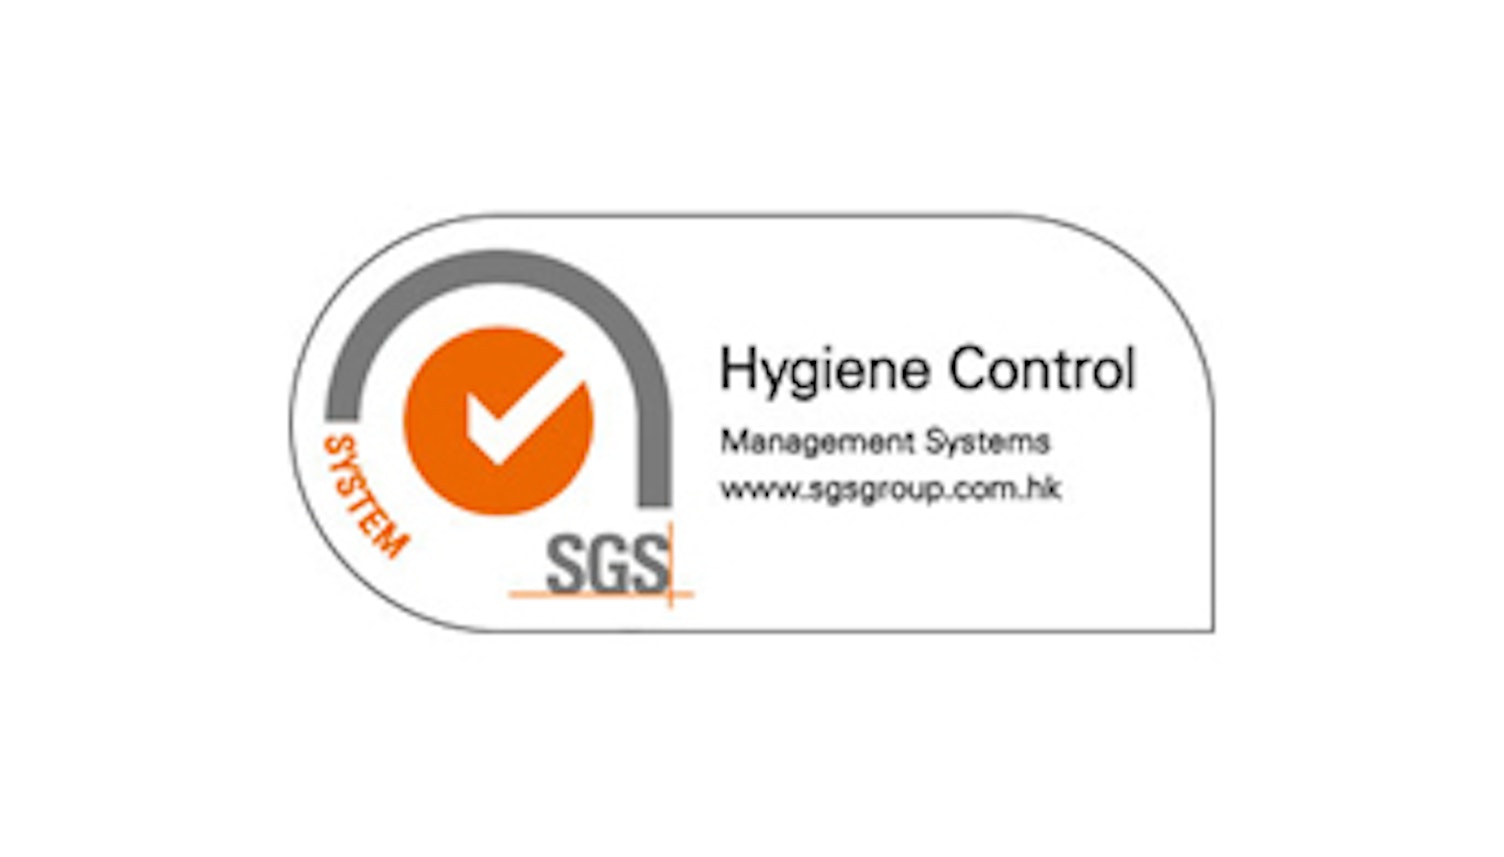 Hygiene Control Management Systerms Logo For Madera Group v2